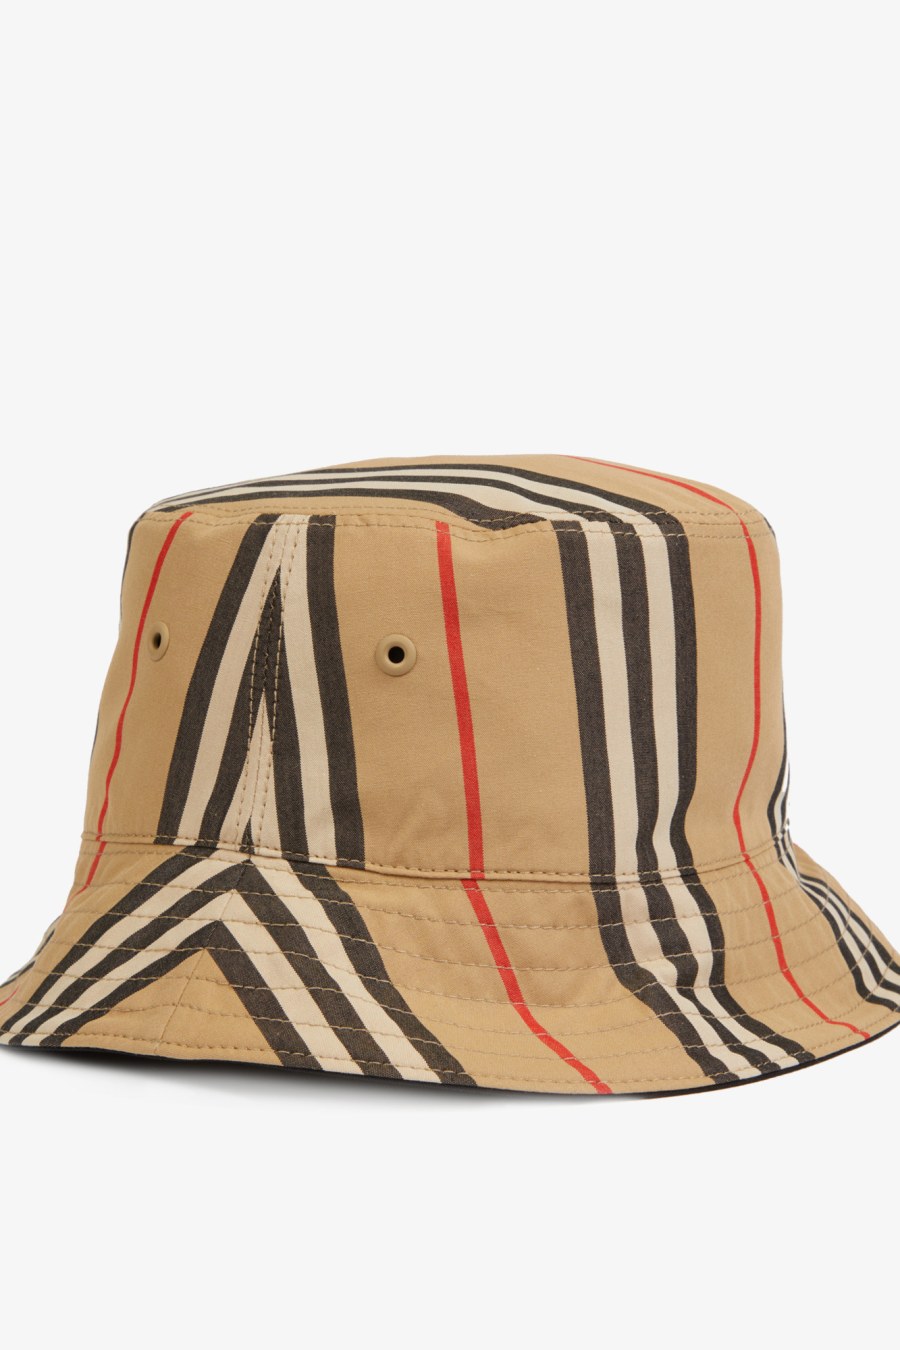 Burberry Cotton House Check Bucket Hat